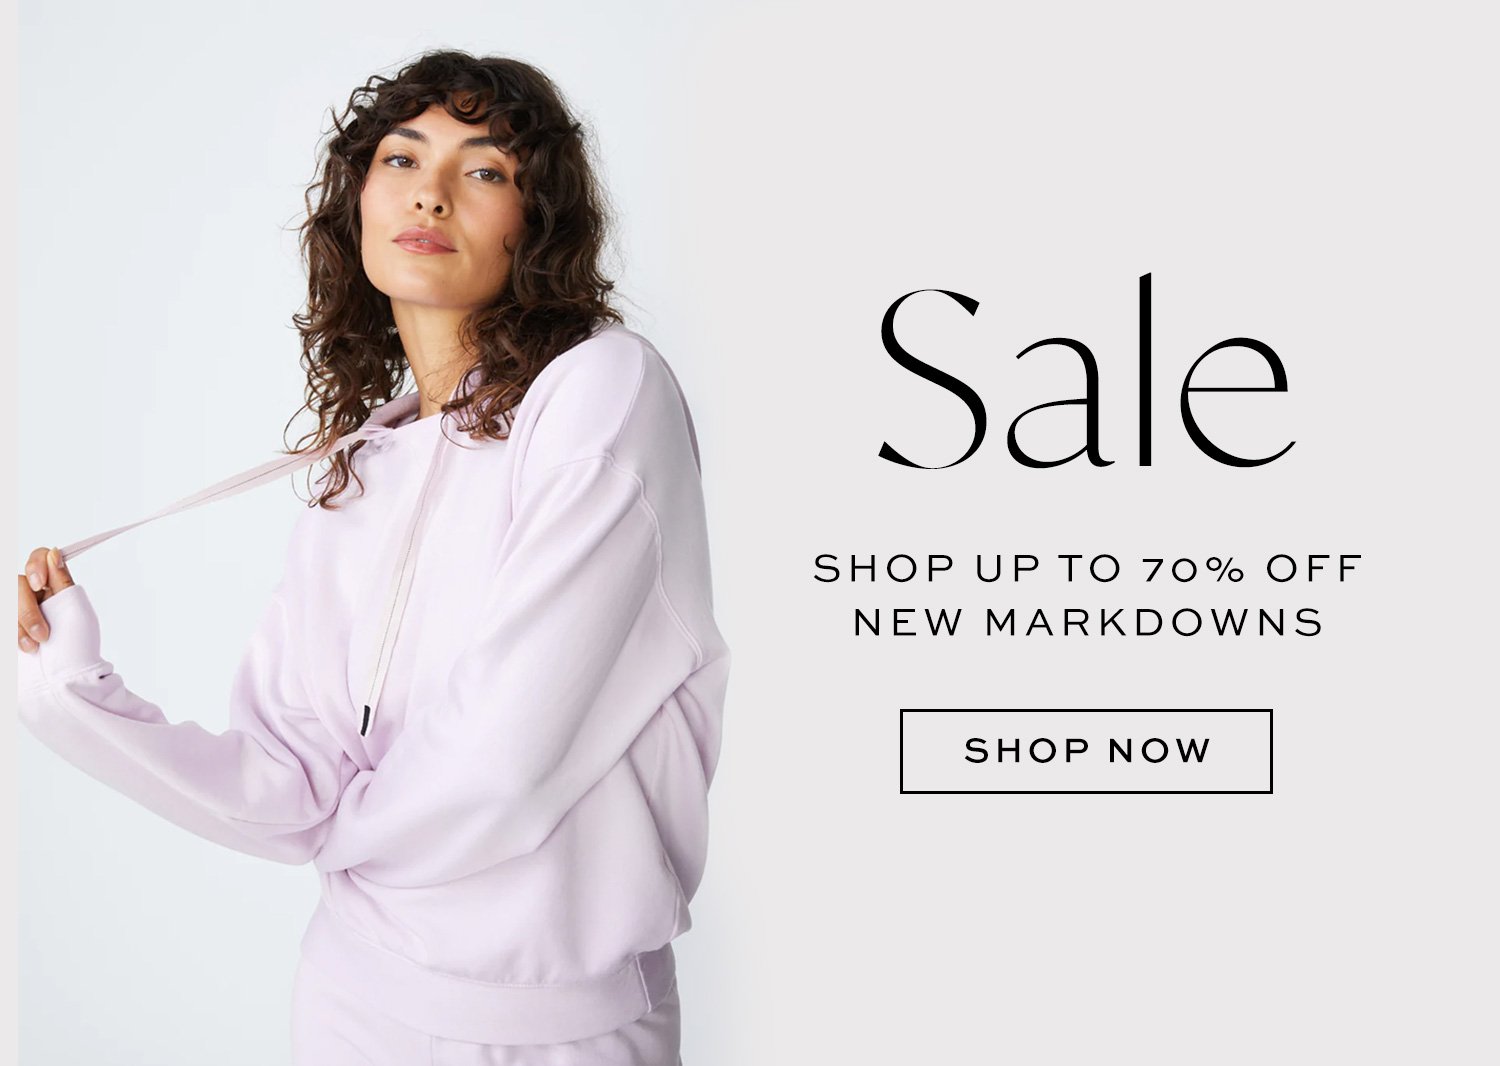 Sale shop up to 70% new markdowns